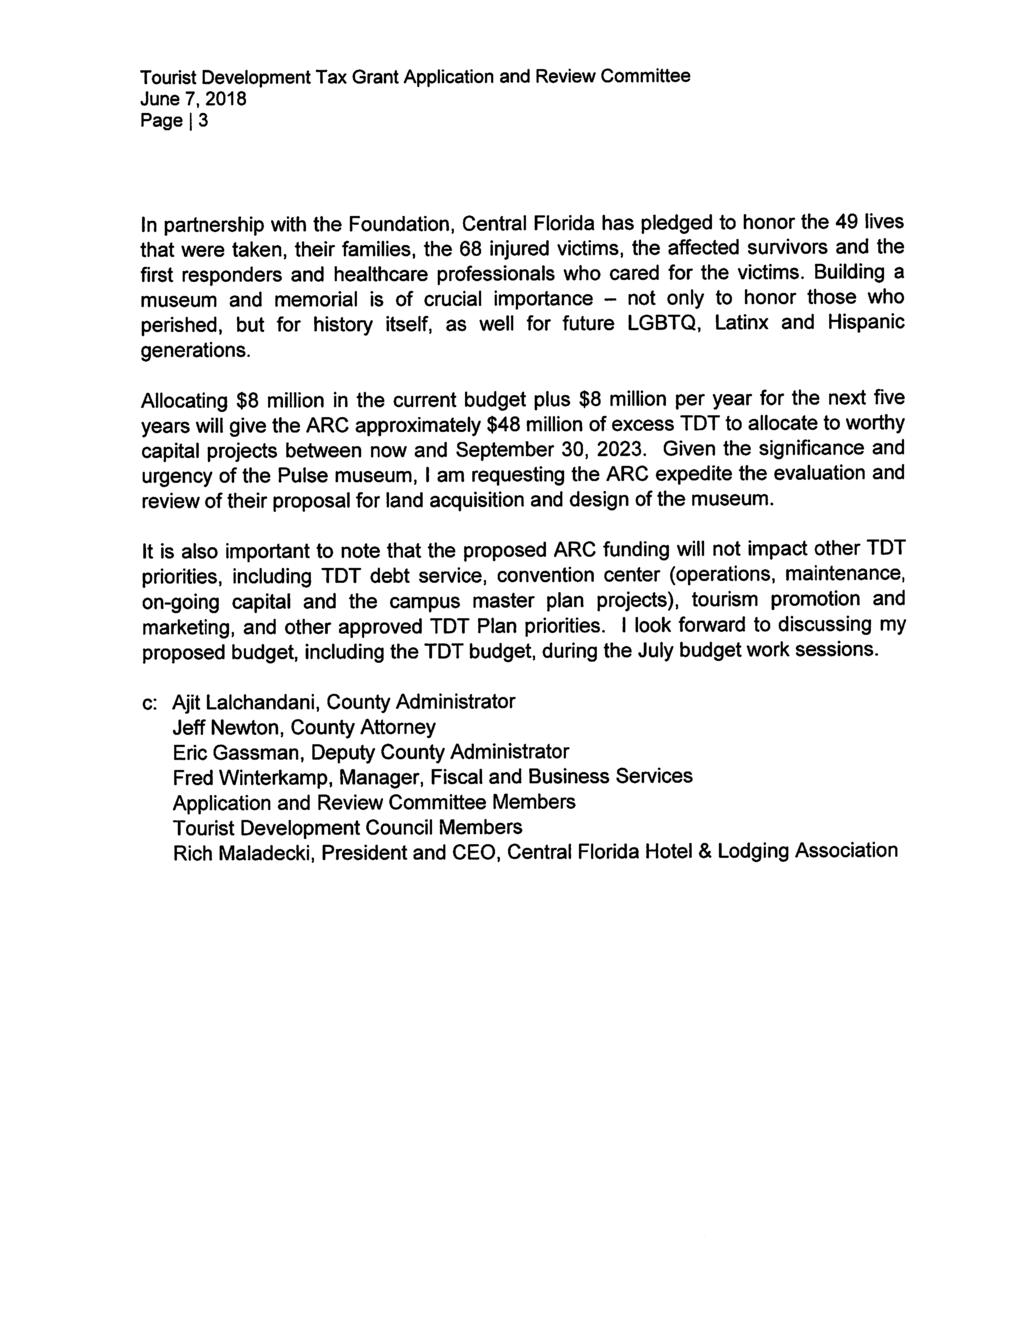 Tourist Development Tax Grant Application and Review Committee June 7, 2018 Page 1 3 In partnership with the Foundation, Central Florida has pledged to honor the 49 lives that were taken, their